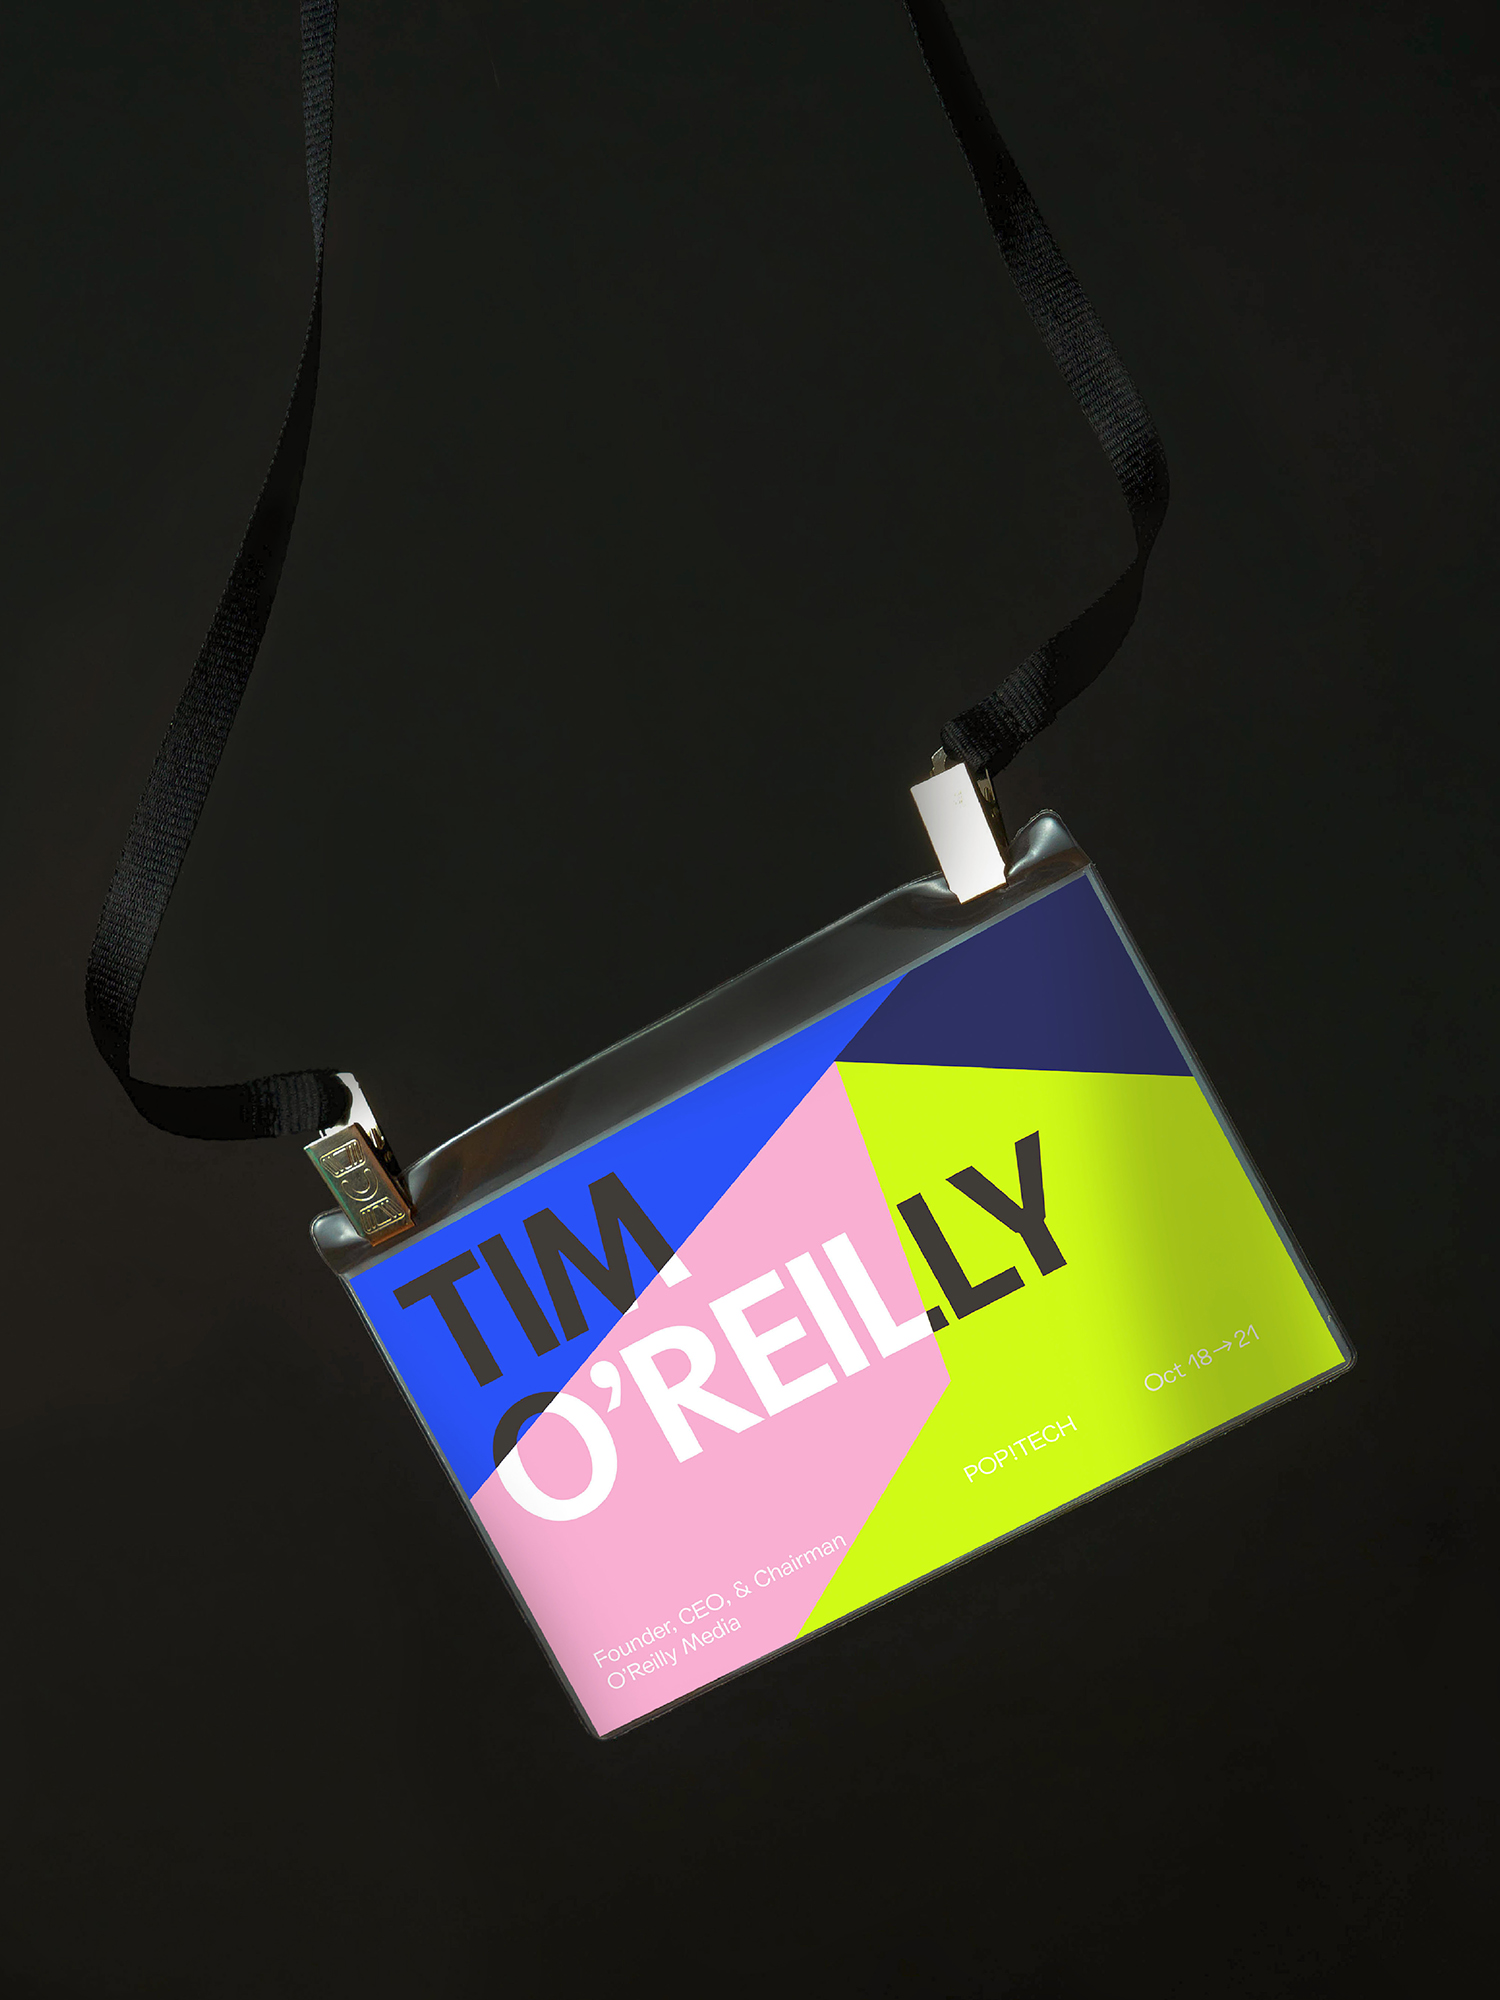 Graphic identity and lanyard designed by Collins for annual conference PopTech